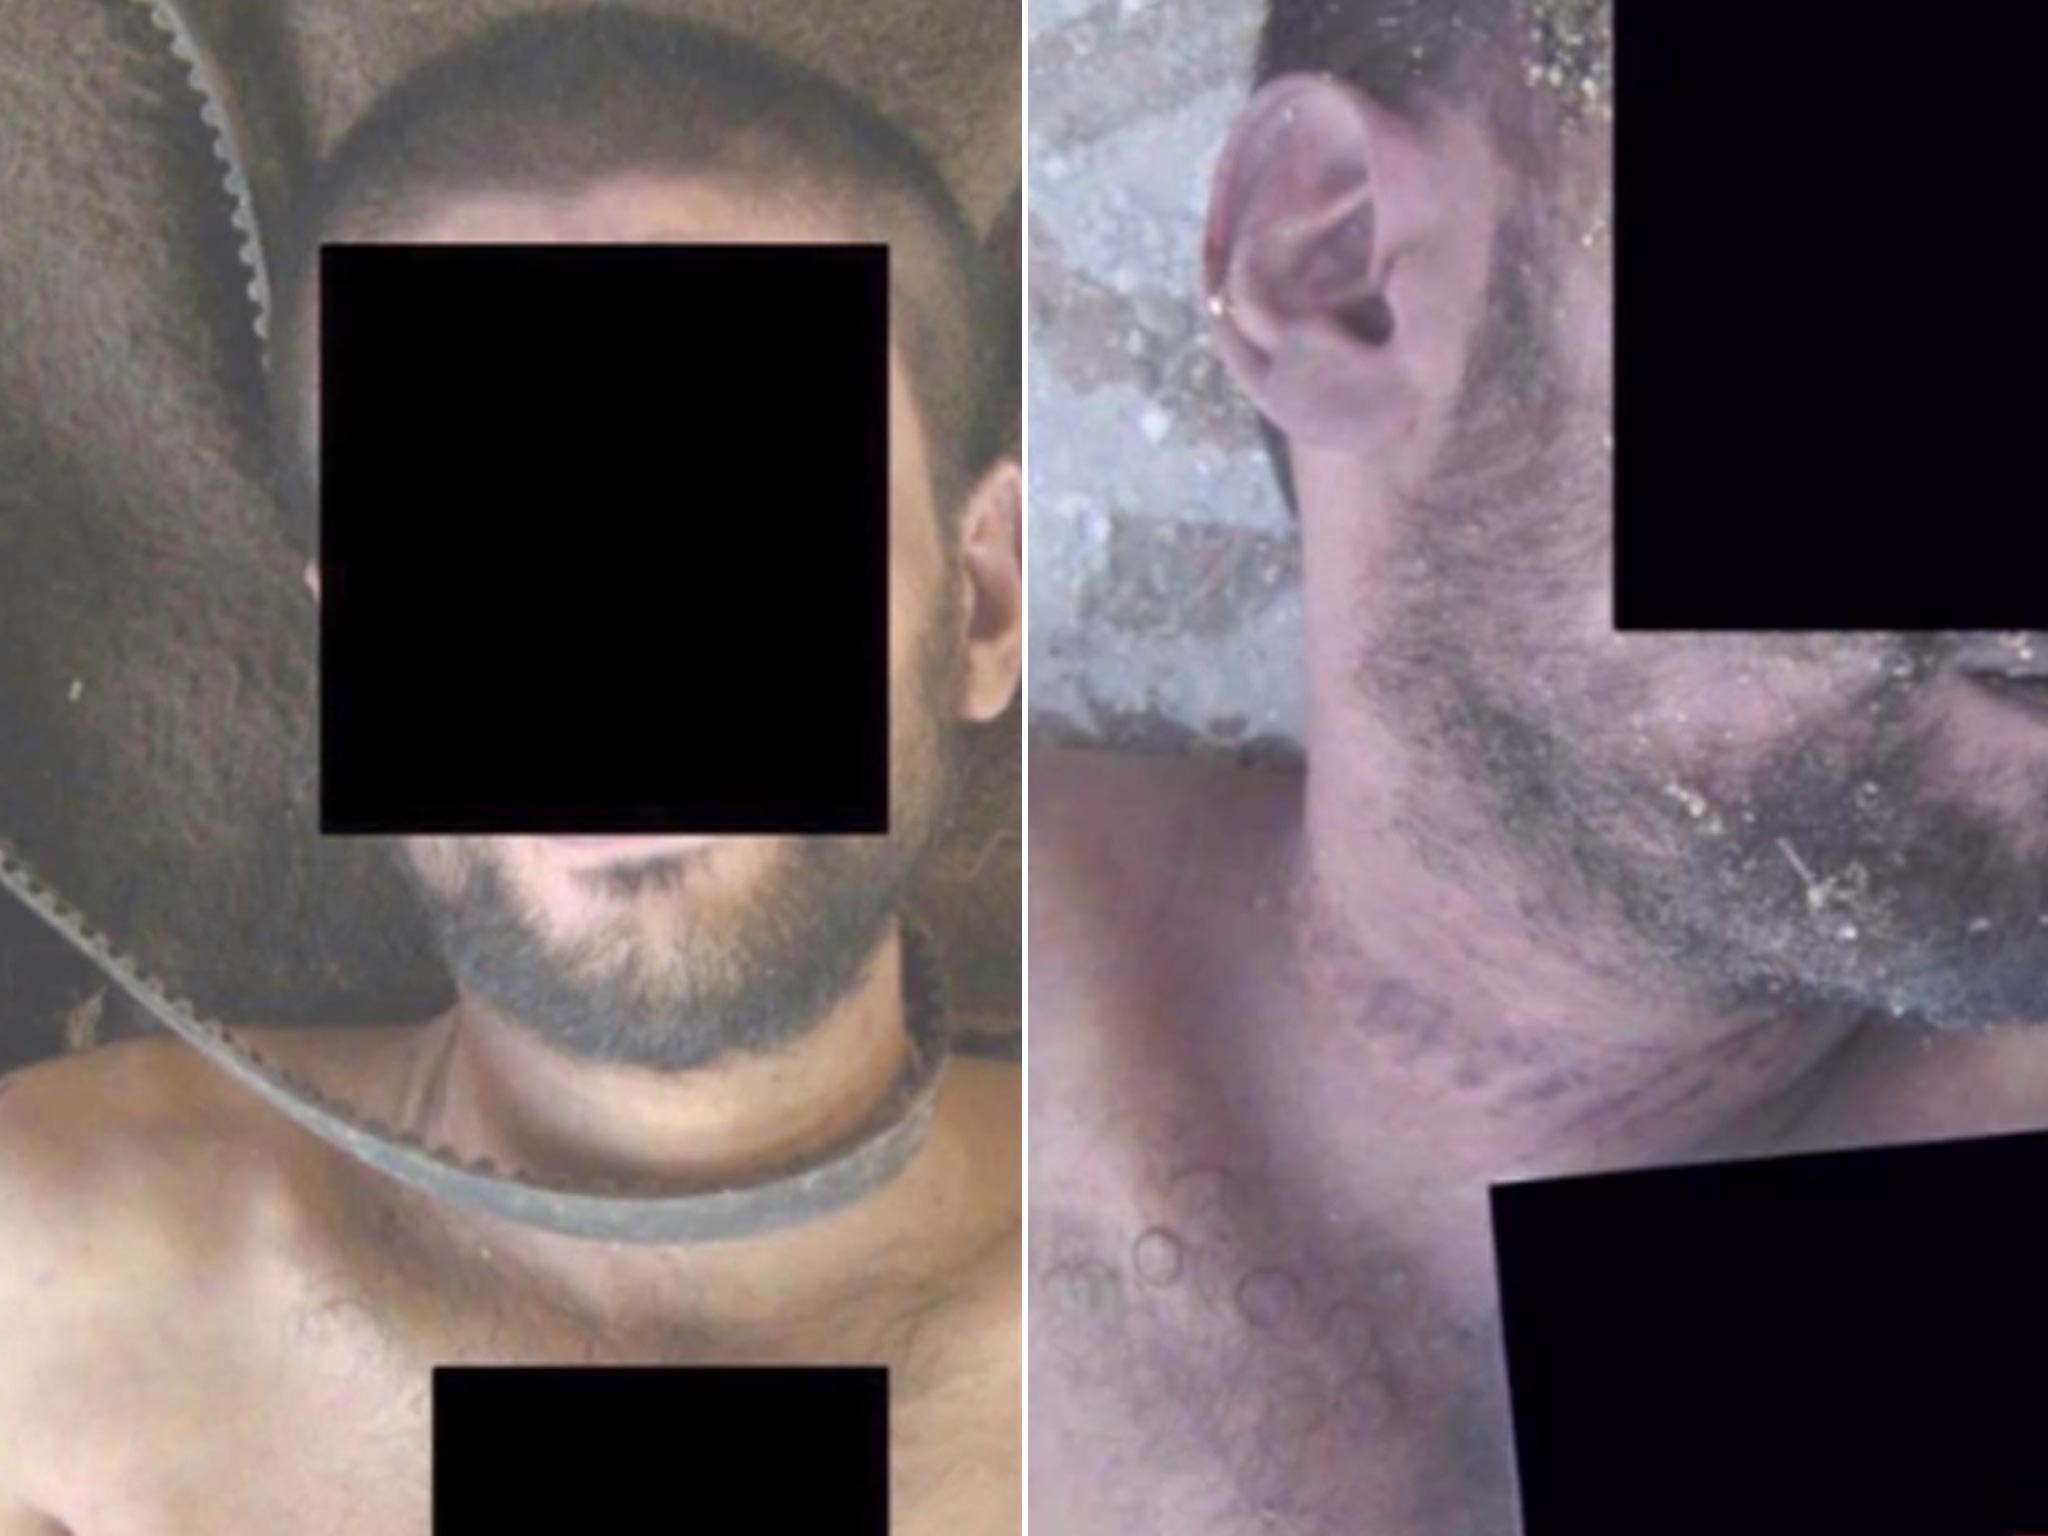 Two horrific images showing men tortured by strangulation in Syria.